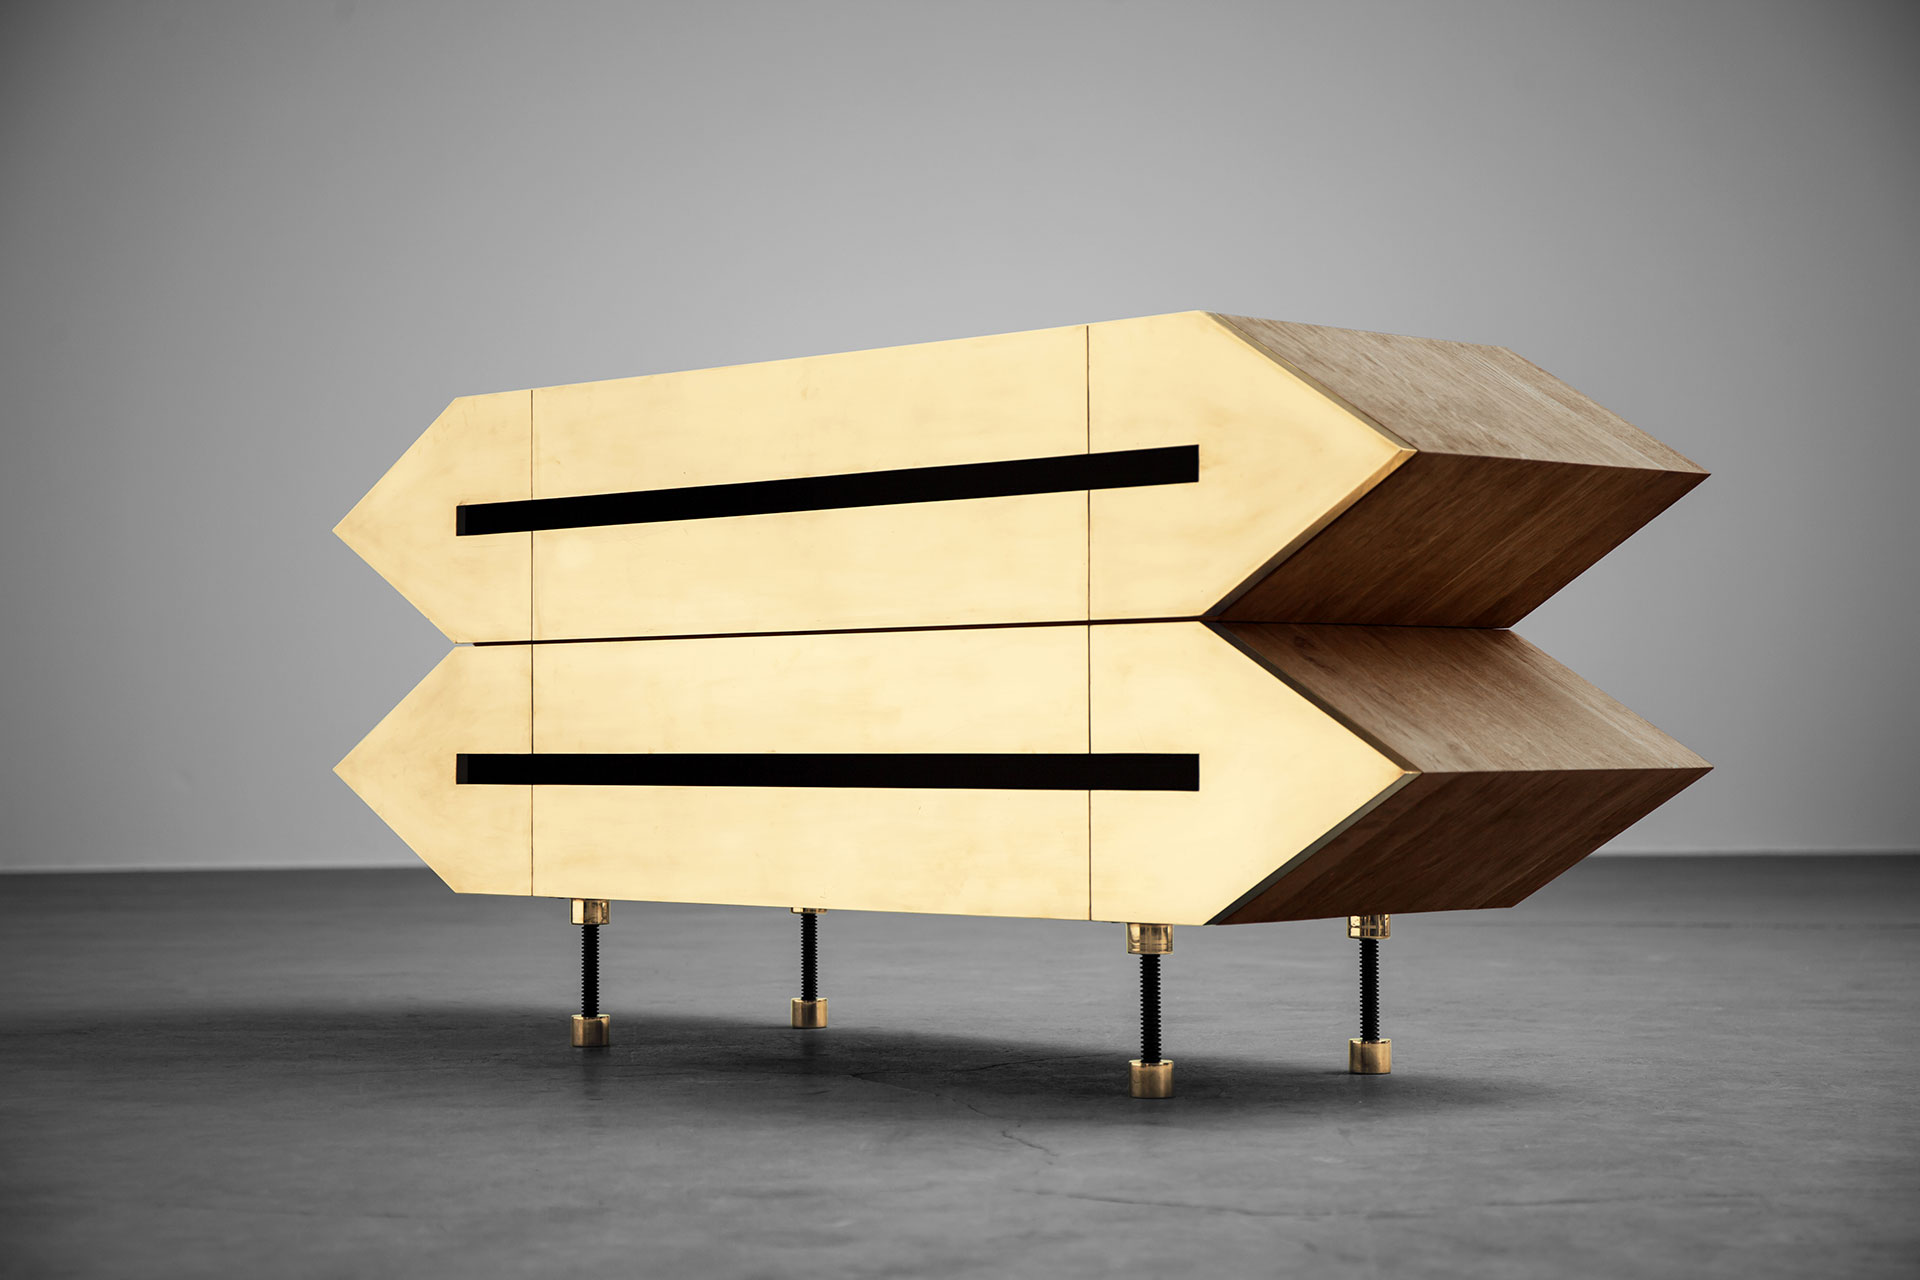 Brutalist design sideboard with brass doors inspired by futuristic architecture